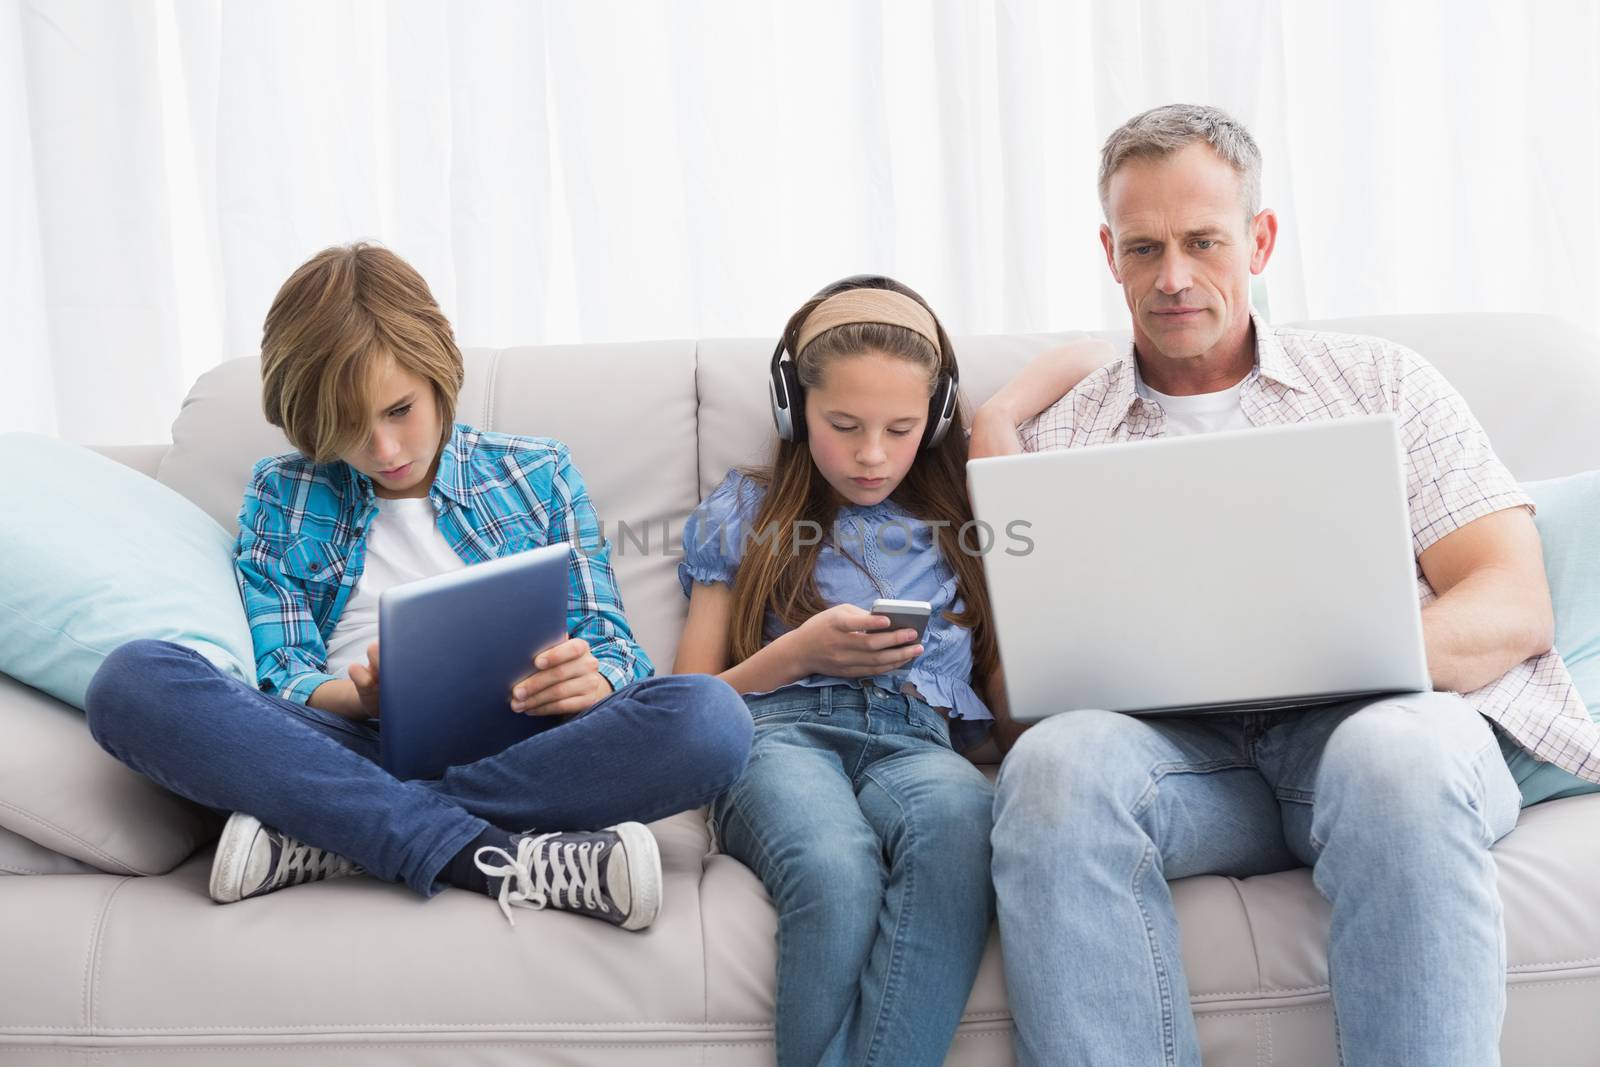 Family focus on wireless technology at home in the living room